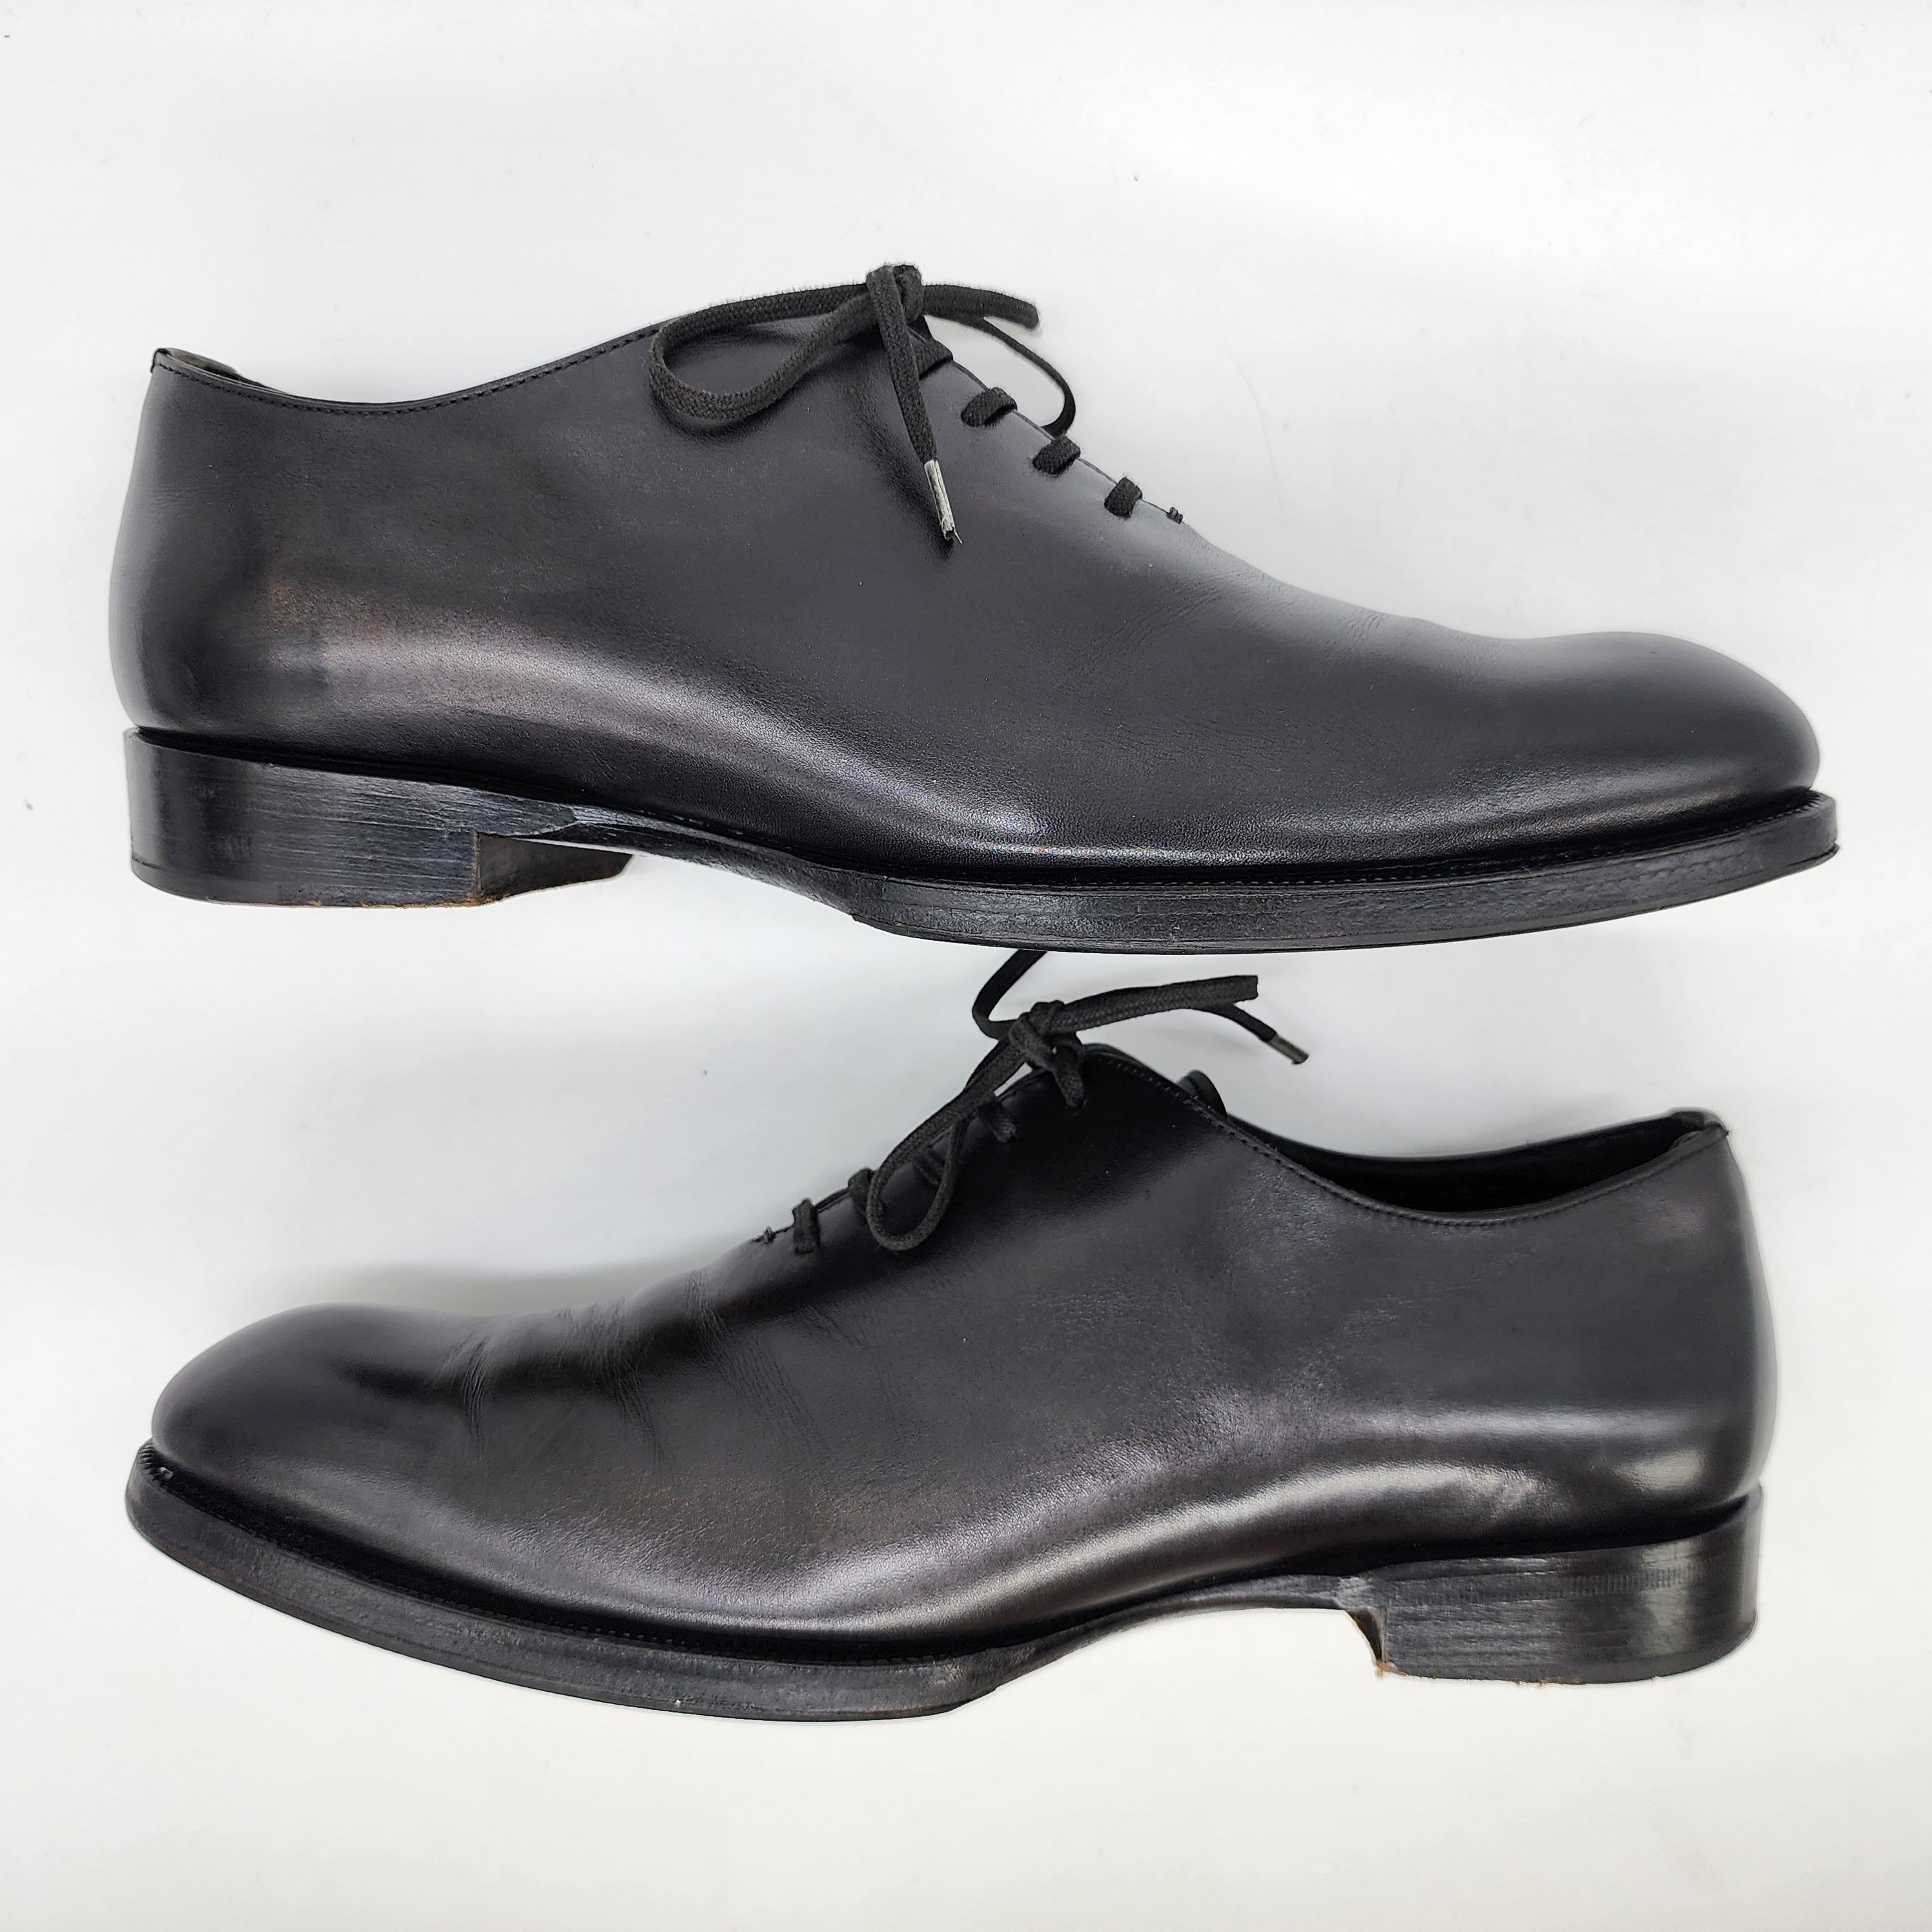 Tom Ford - Elkan Black Leather Whole-cut Oxford Shoes - 5